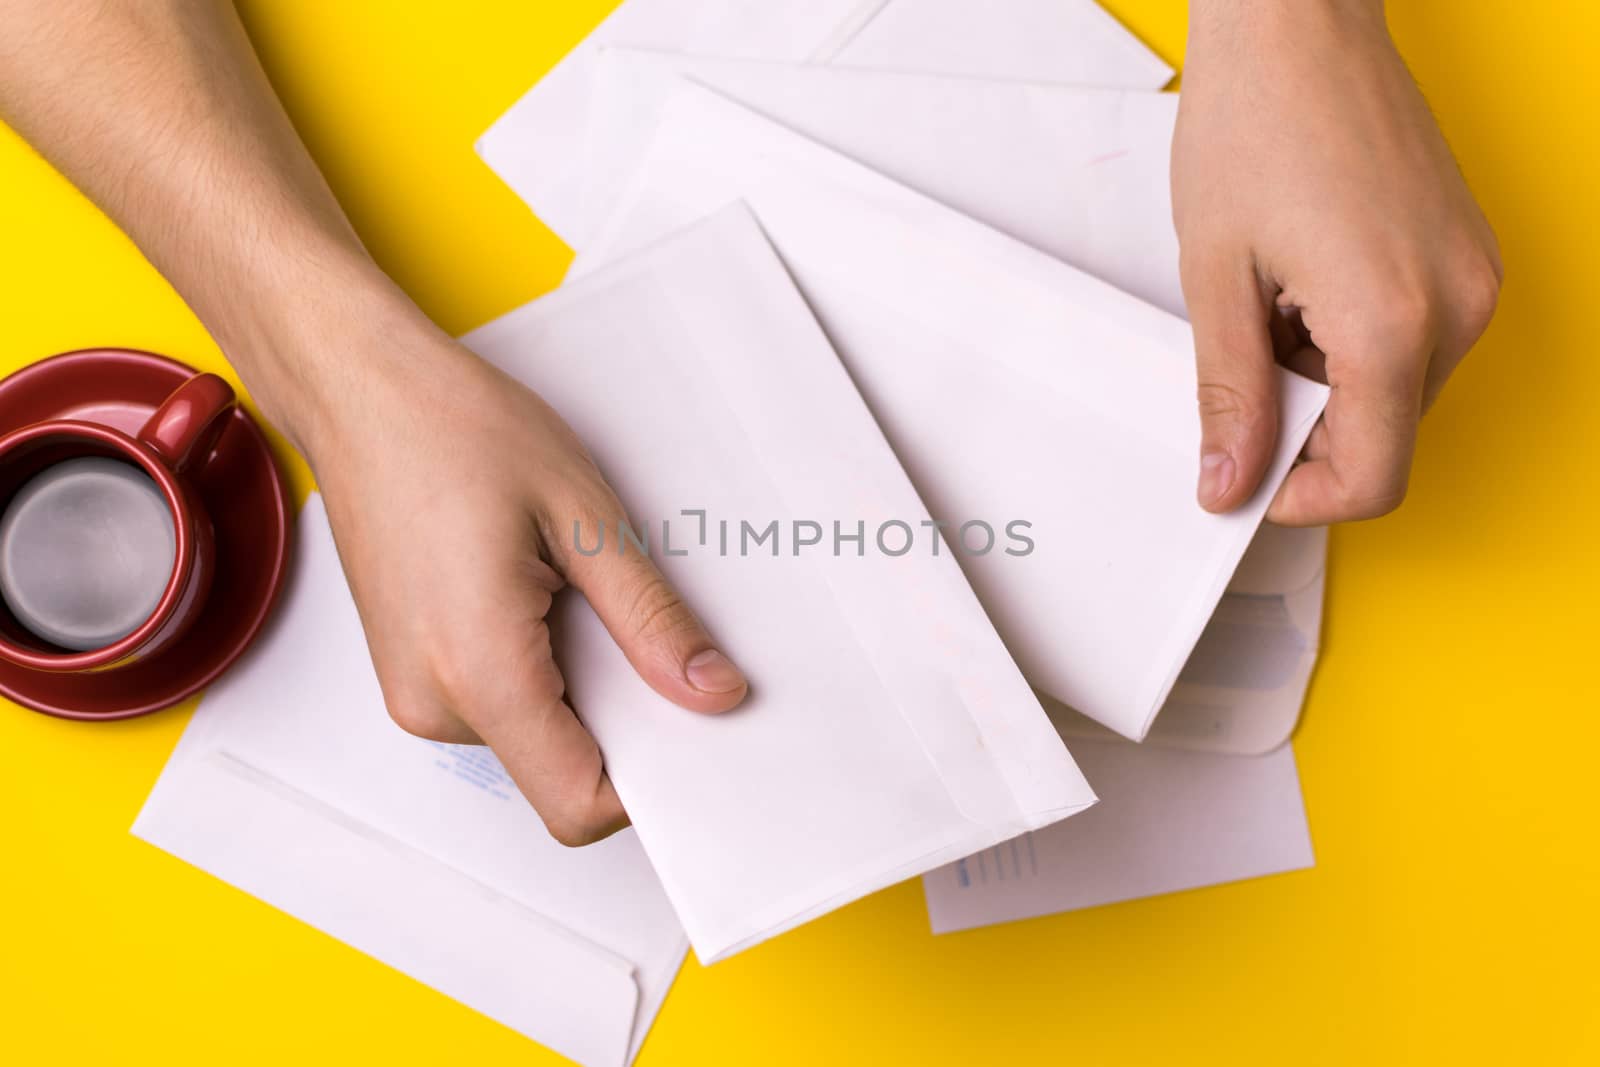 A man sorts the mail. Male hands the envelopes on a yellow background, a red coffee Cup.